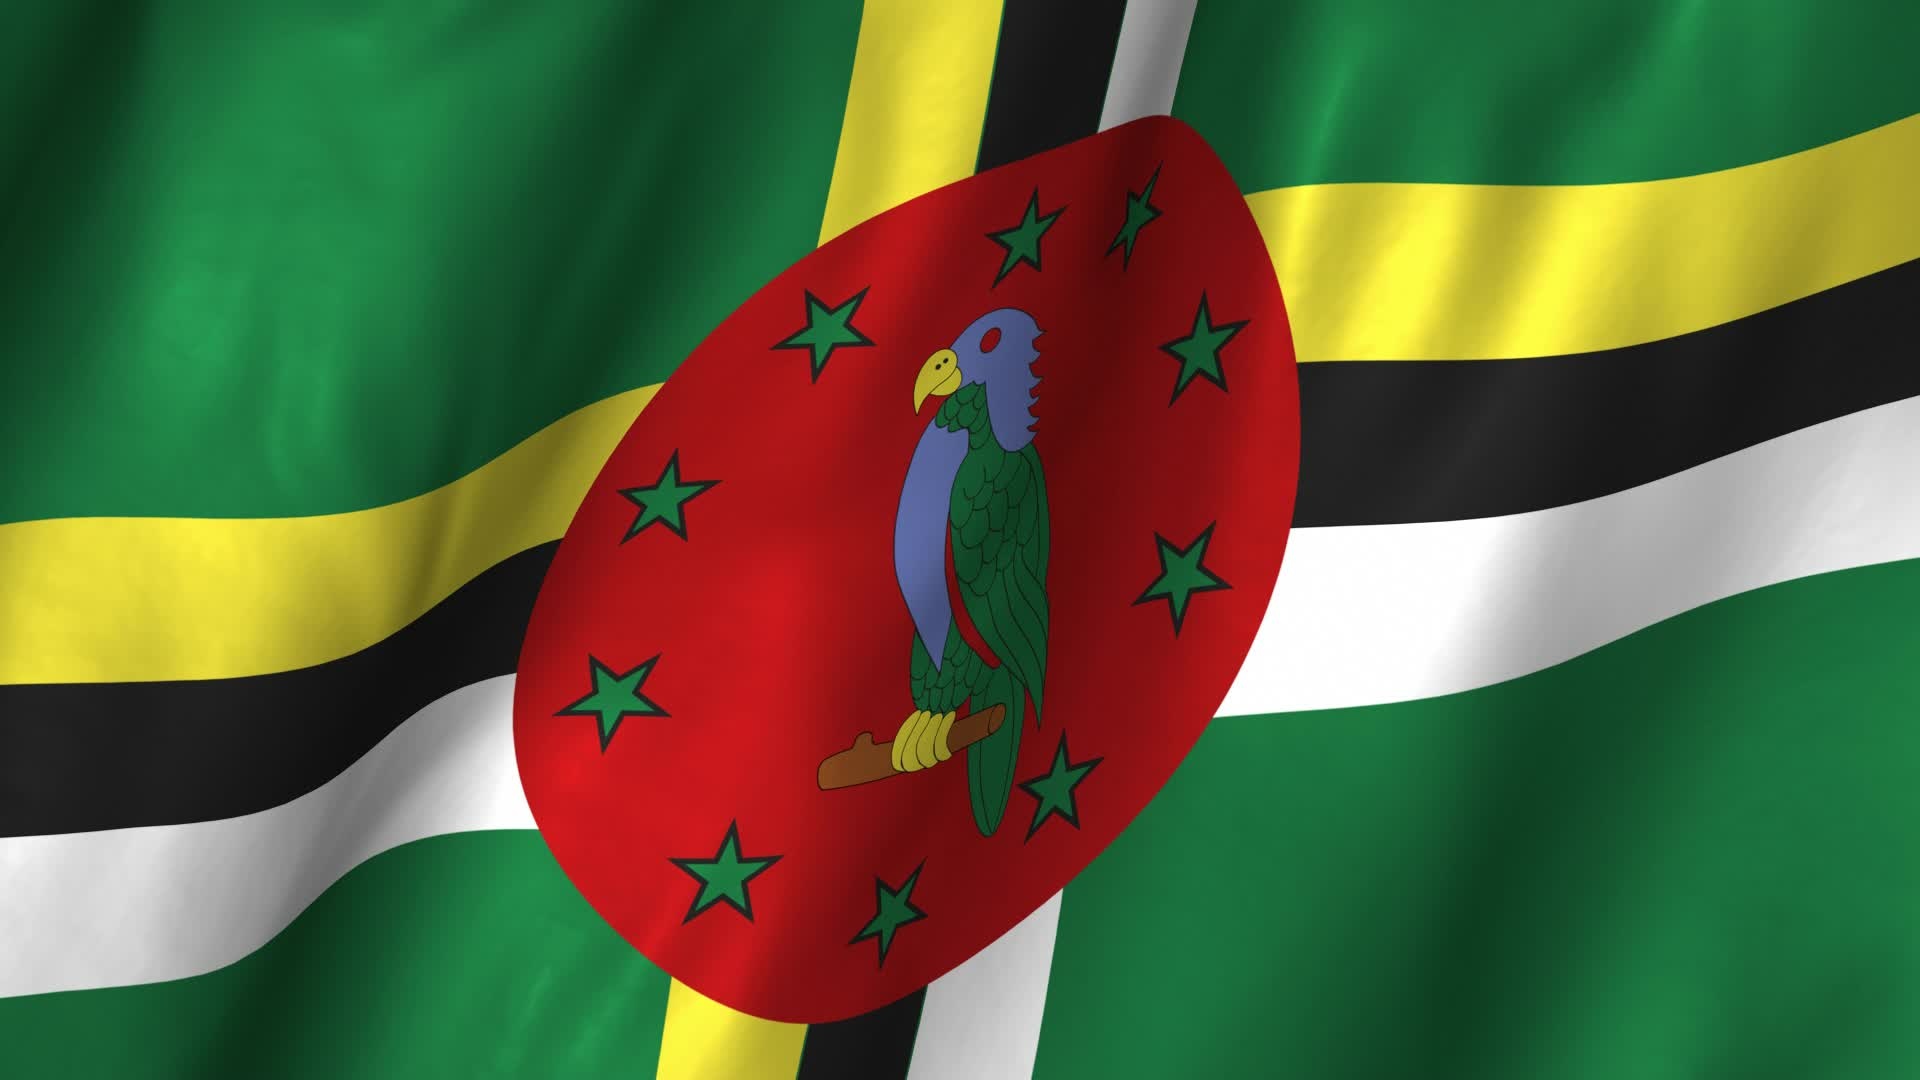 Dominica National Team, Sports Excellence, Representation, Competitive Spirit, 1920x1080 Full HD Desktop